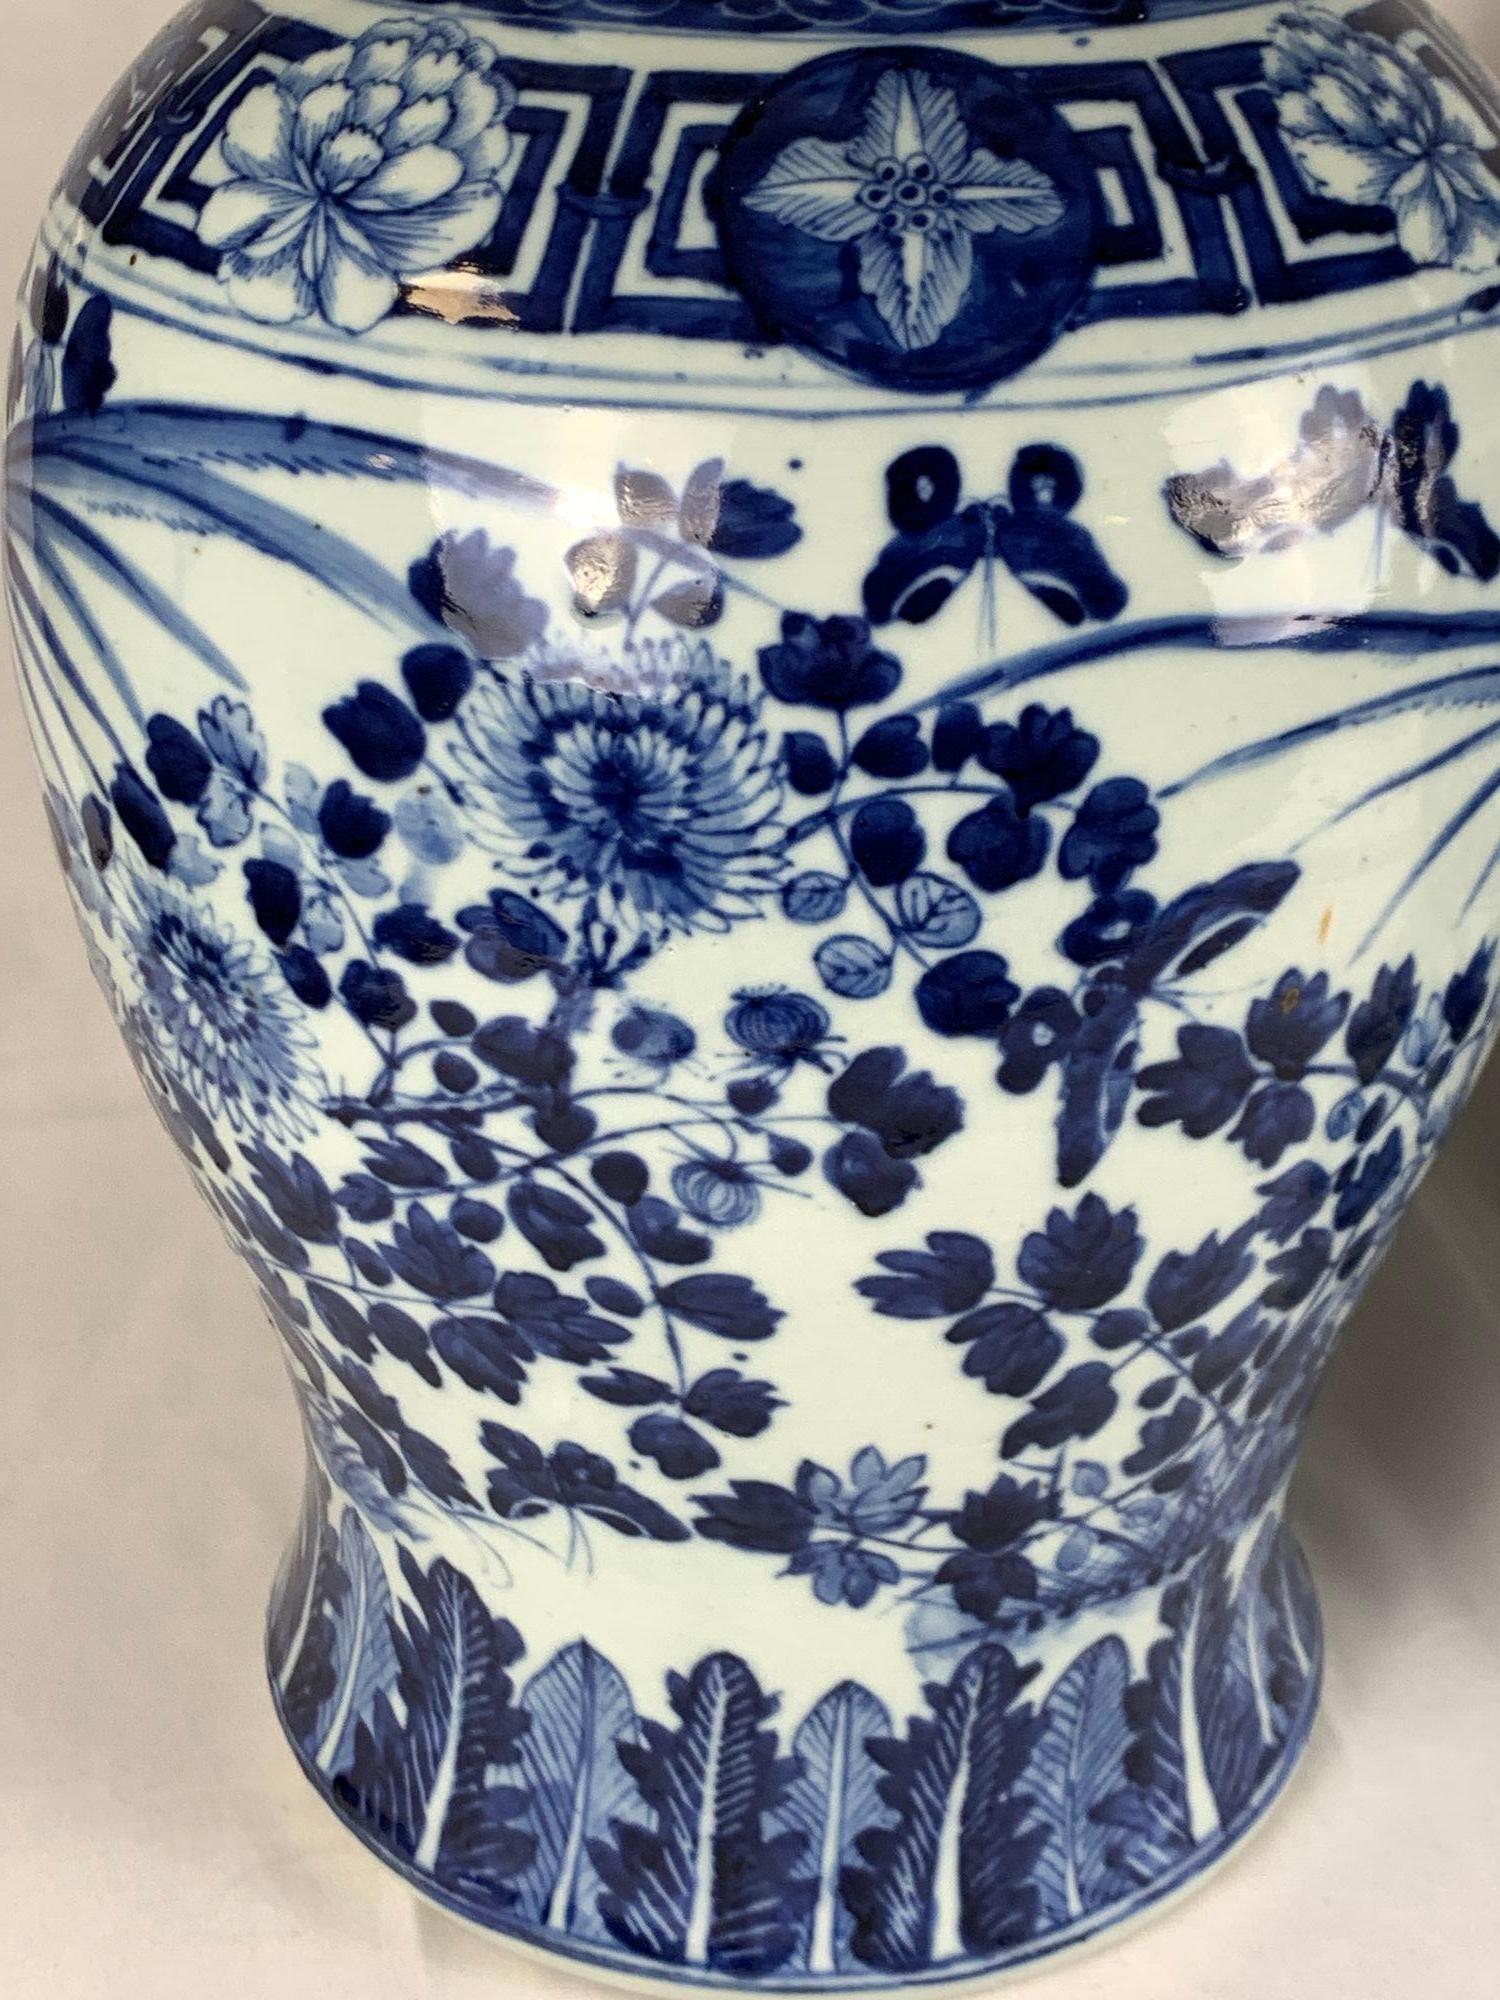 This pair of hand painted blue and white Chinese porcelain jars was made in the late Qing Dynasty in the Guangxu Era circa 1880.
Each jar is expertly hand-painted in shades of cobalt blue, depicting a joyful scene of two songbirds singing to each